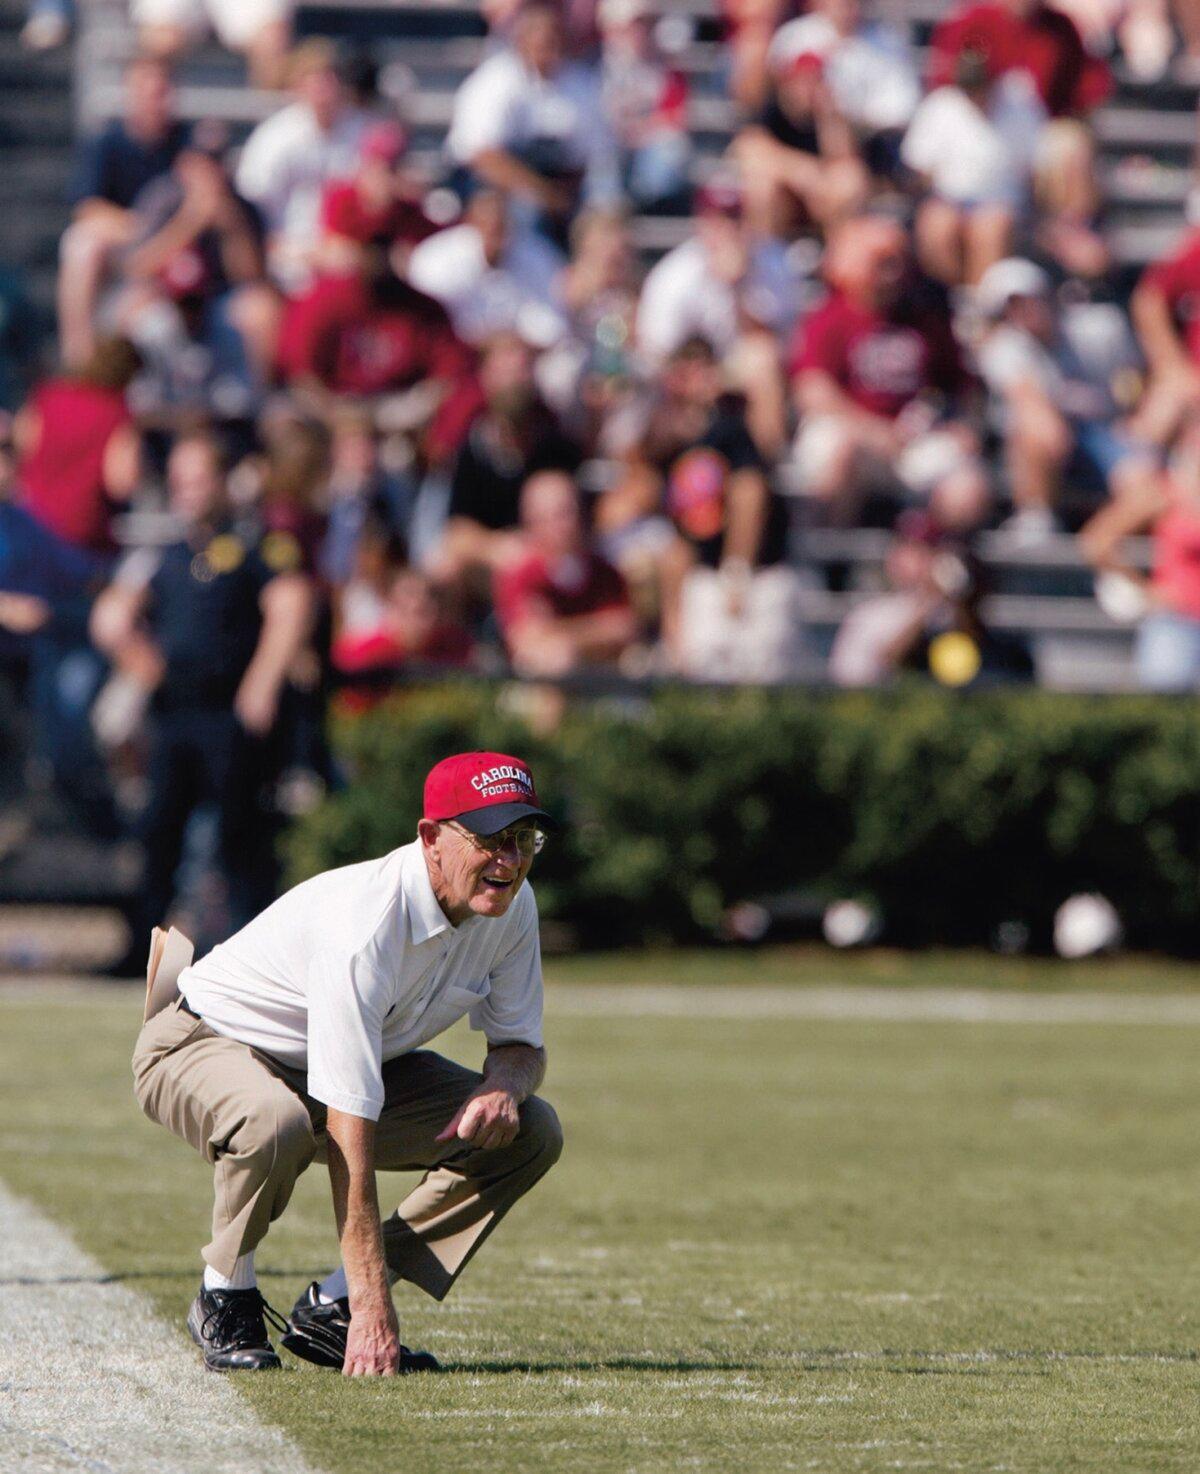 Mr. Holtz looks on from the sidelines while coaching the University of South Carolina Gamecocks, at Williams–Brice Stadium in Columbia, S.C., in October 2002. (Craig Jones/Staff/Getty Images)